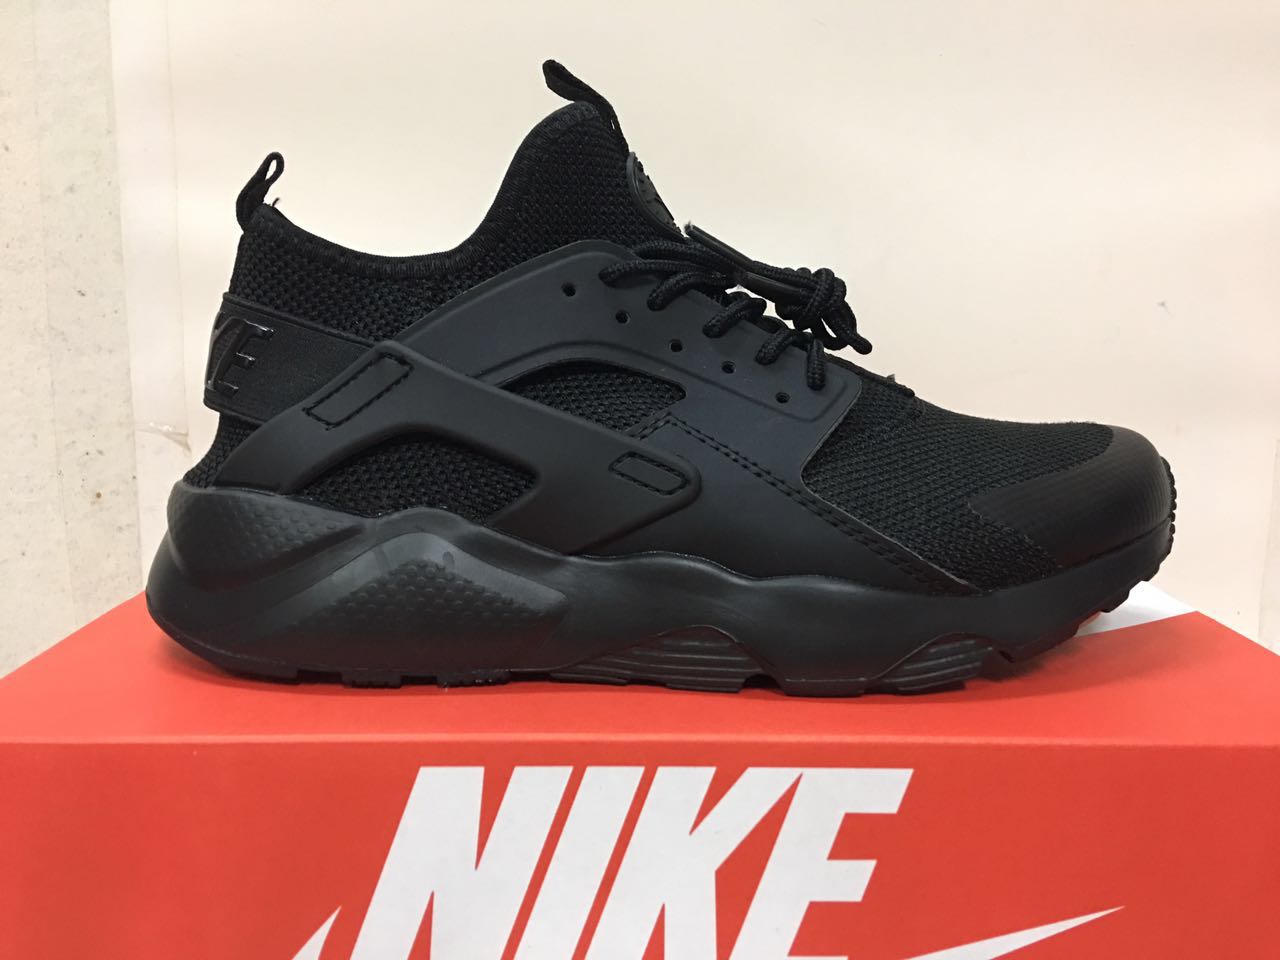 Nike Air Huarache 6 Flyknit All Black Shoes - Click Image to Close